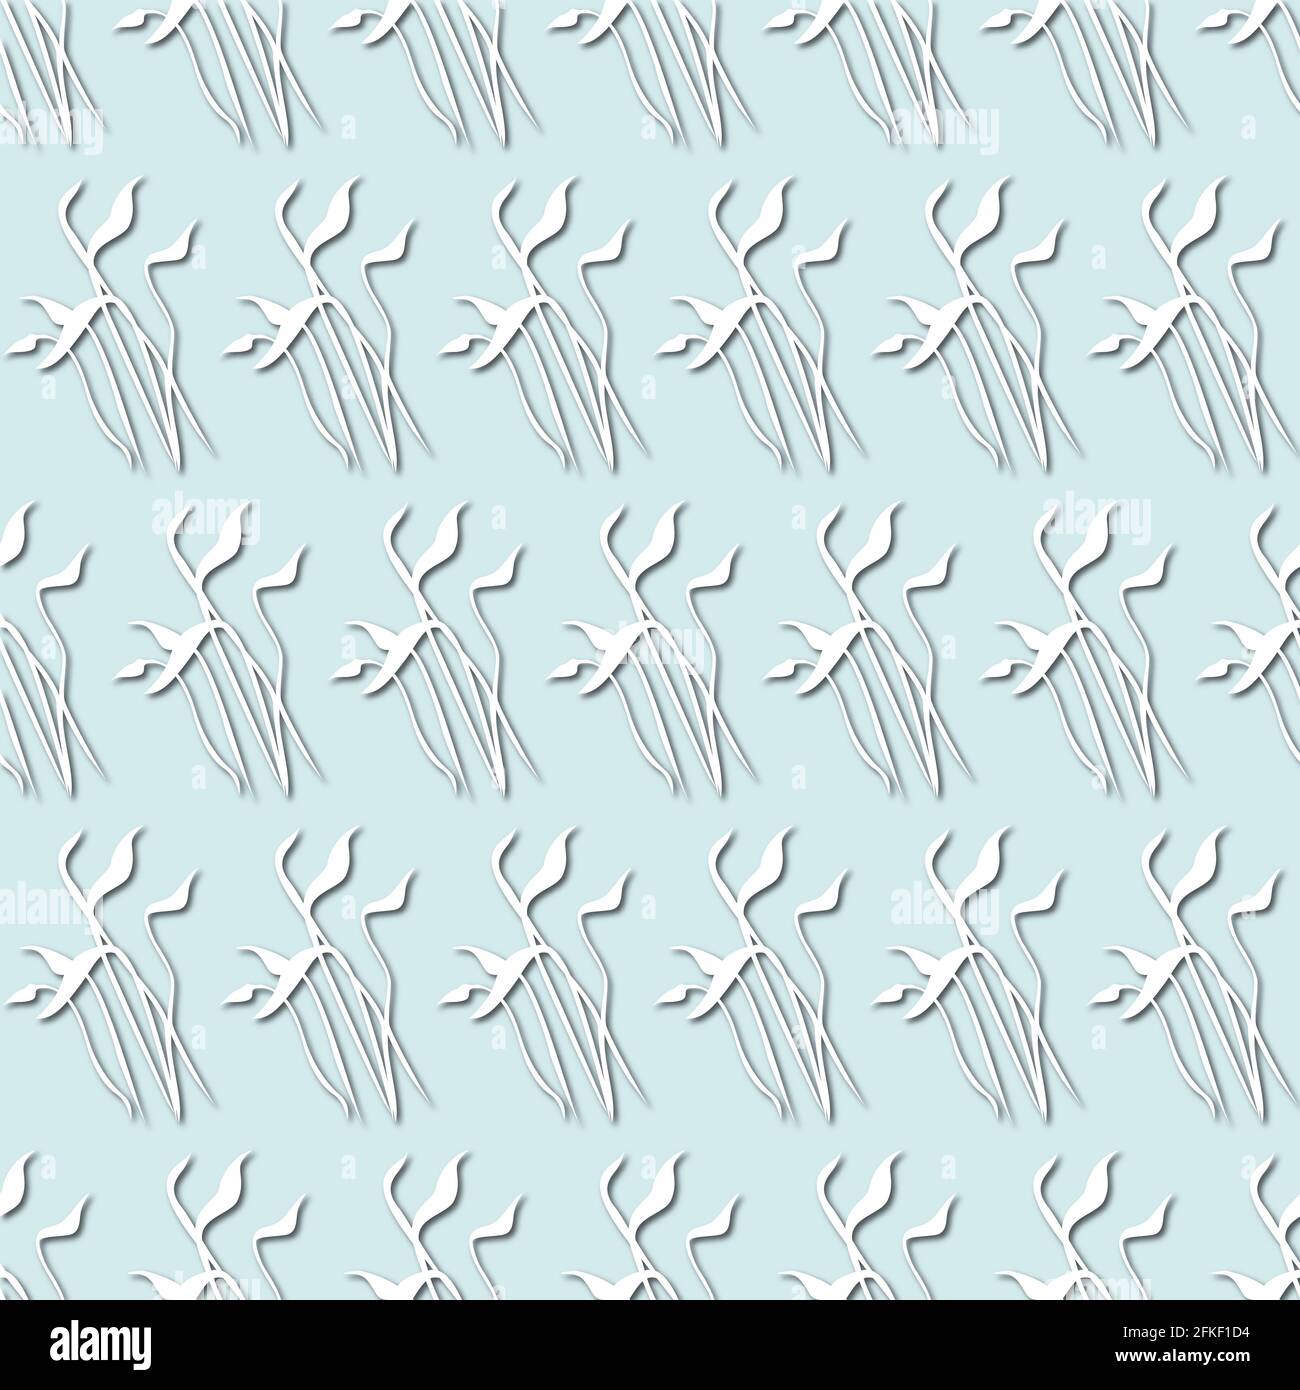 White plant, flowers silhouette on pale blue background, seamless pattern. Paper cut style with drop shadows and highlights. Stock Photo